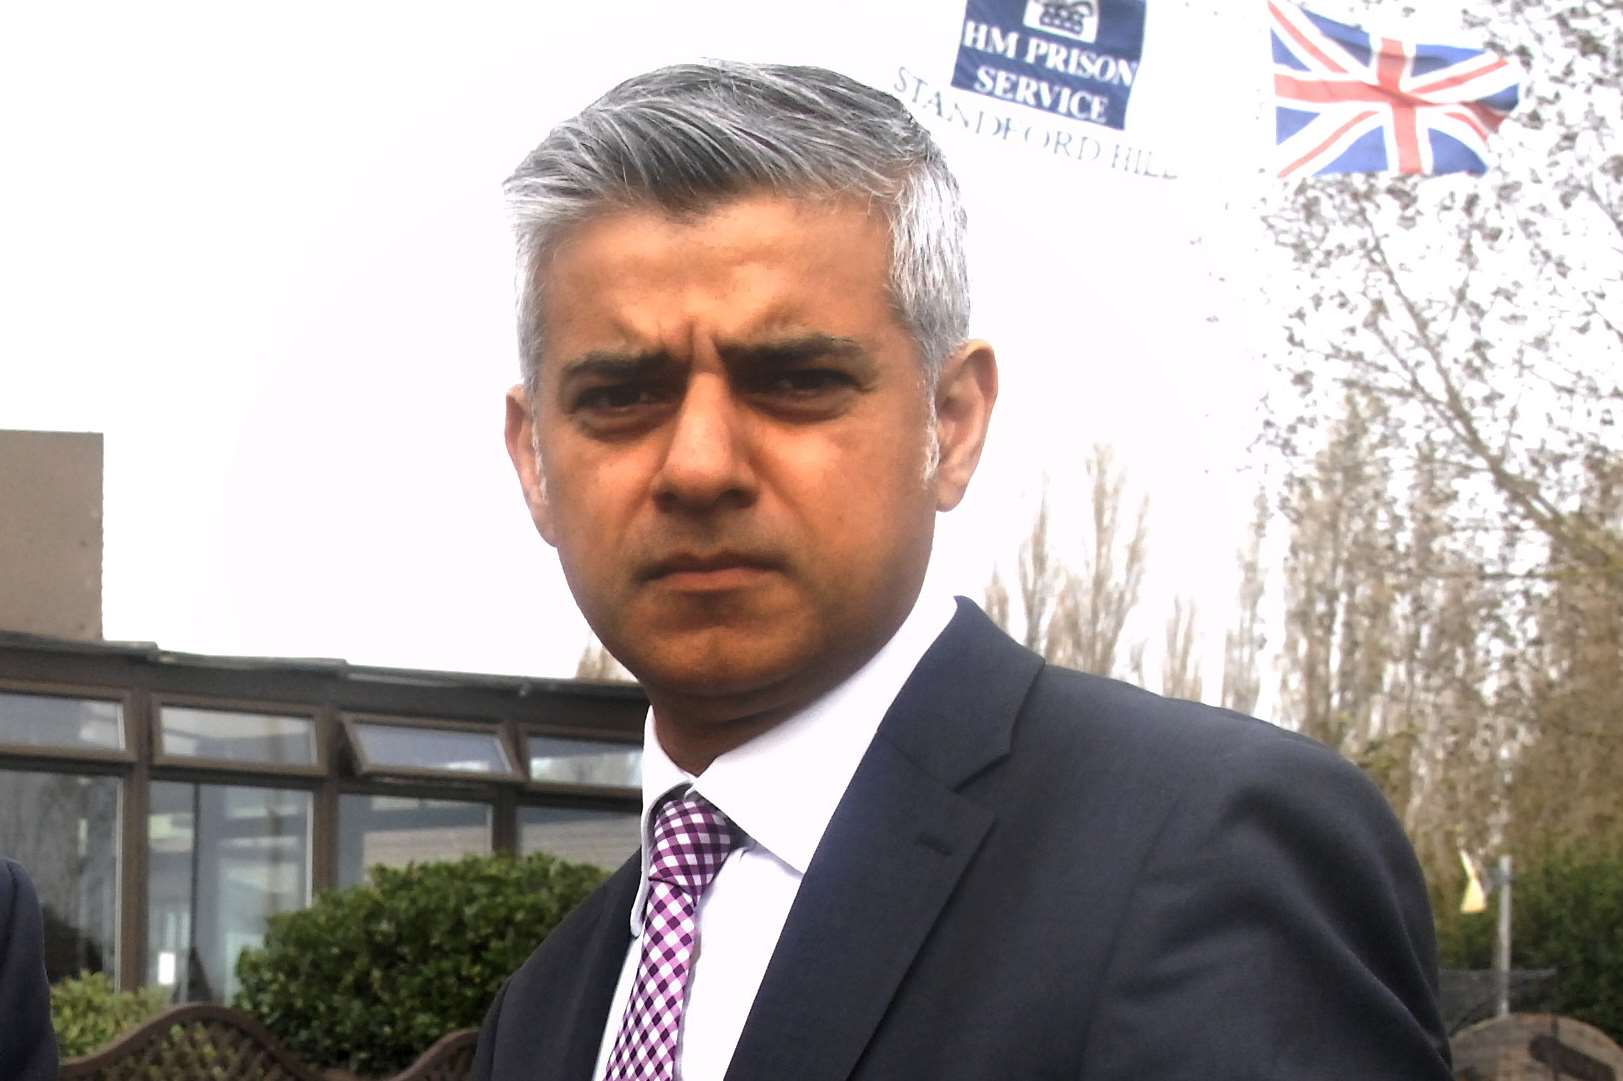 Mayor of London Sadiq Khan will sell the water cannons to fund youth services in the capital.